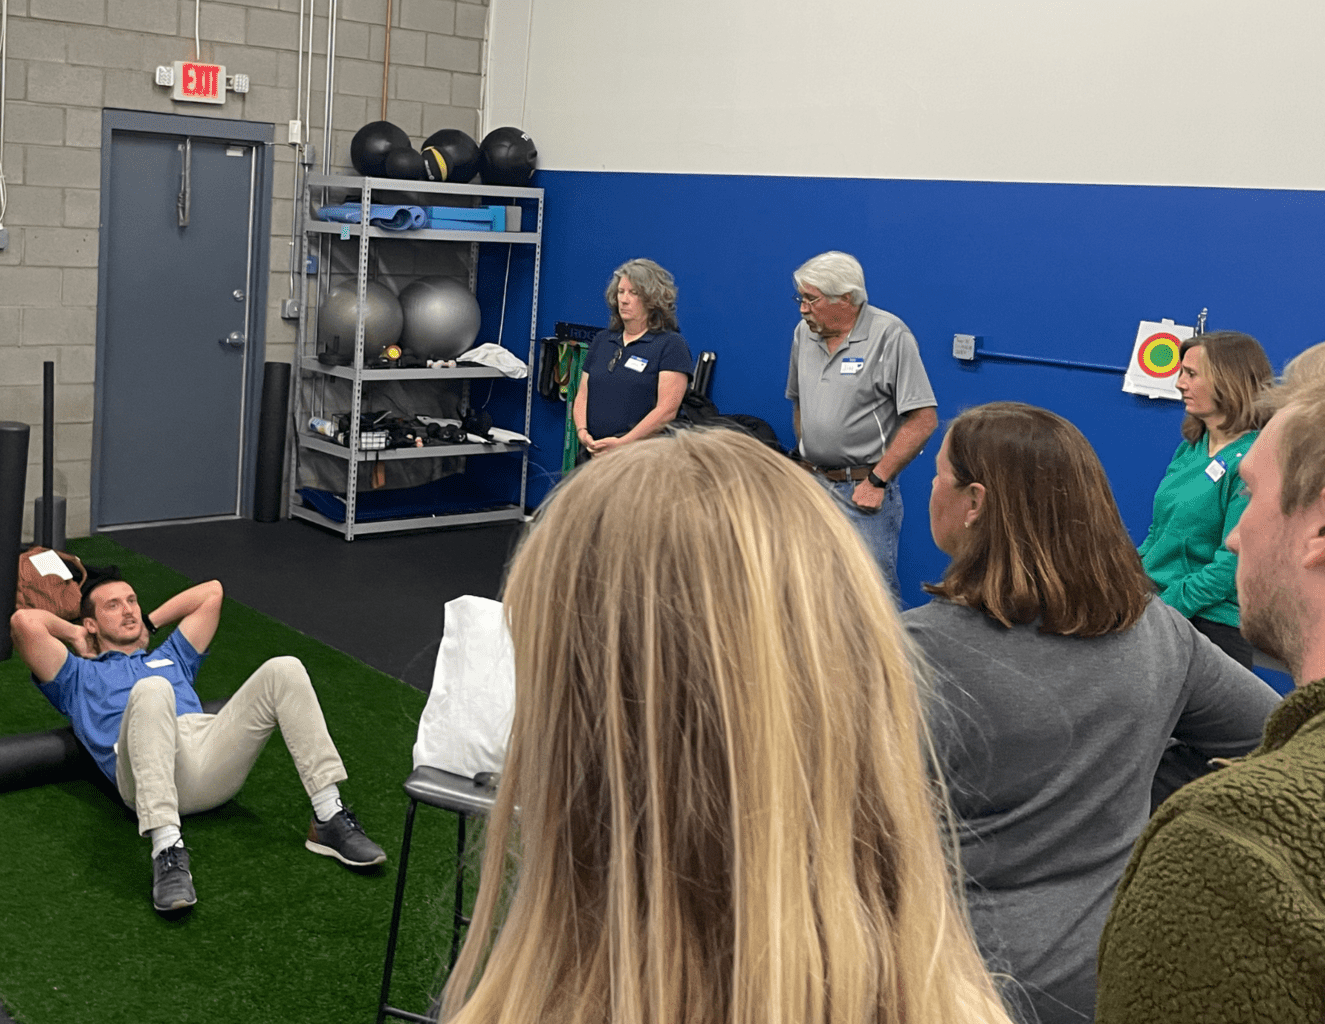 Dr. Jake showing attendees how to foam roll